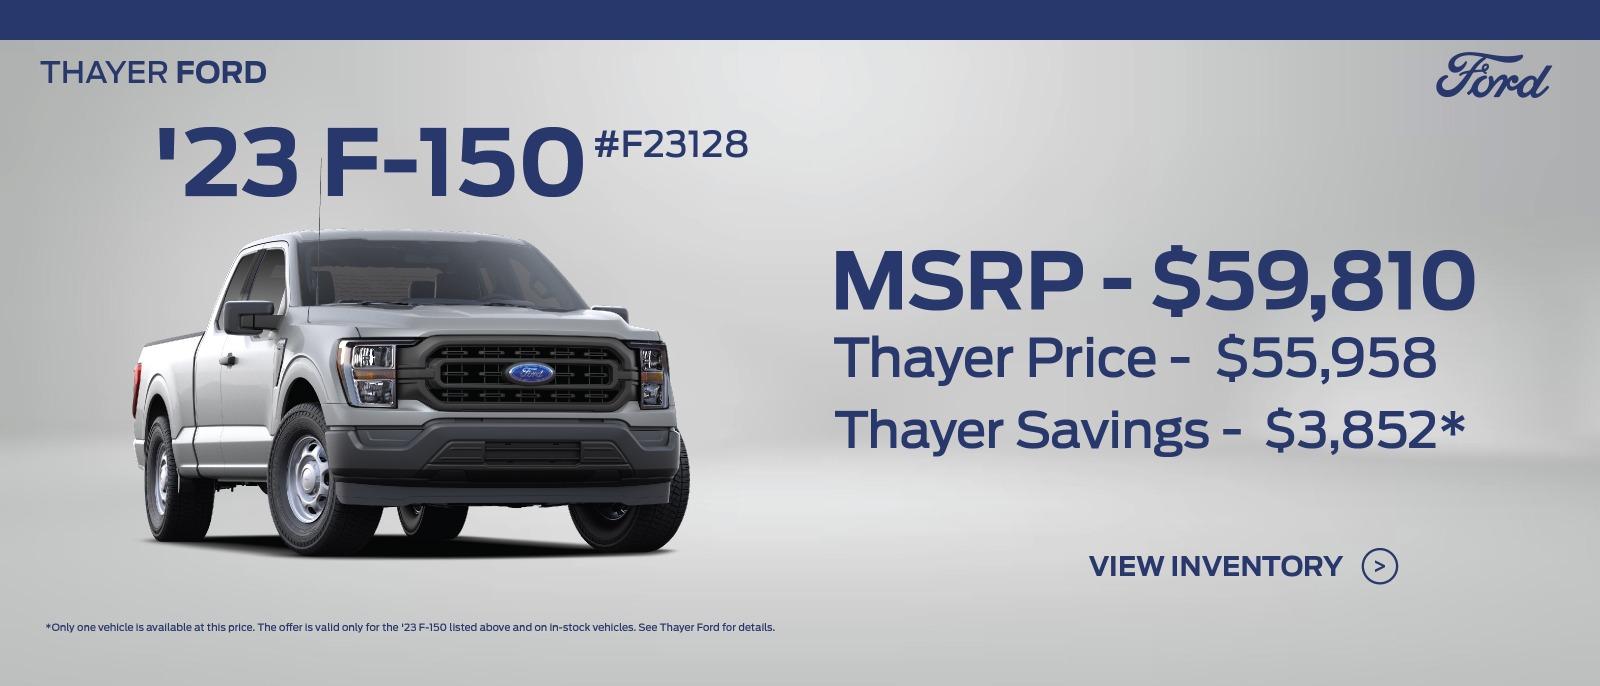 Thayer price for f-150 May 24